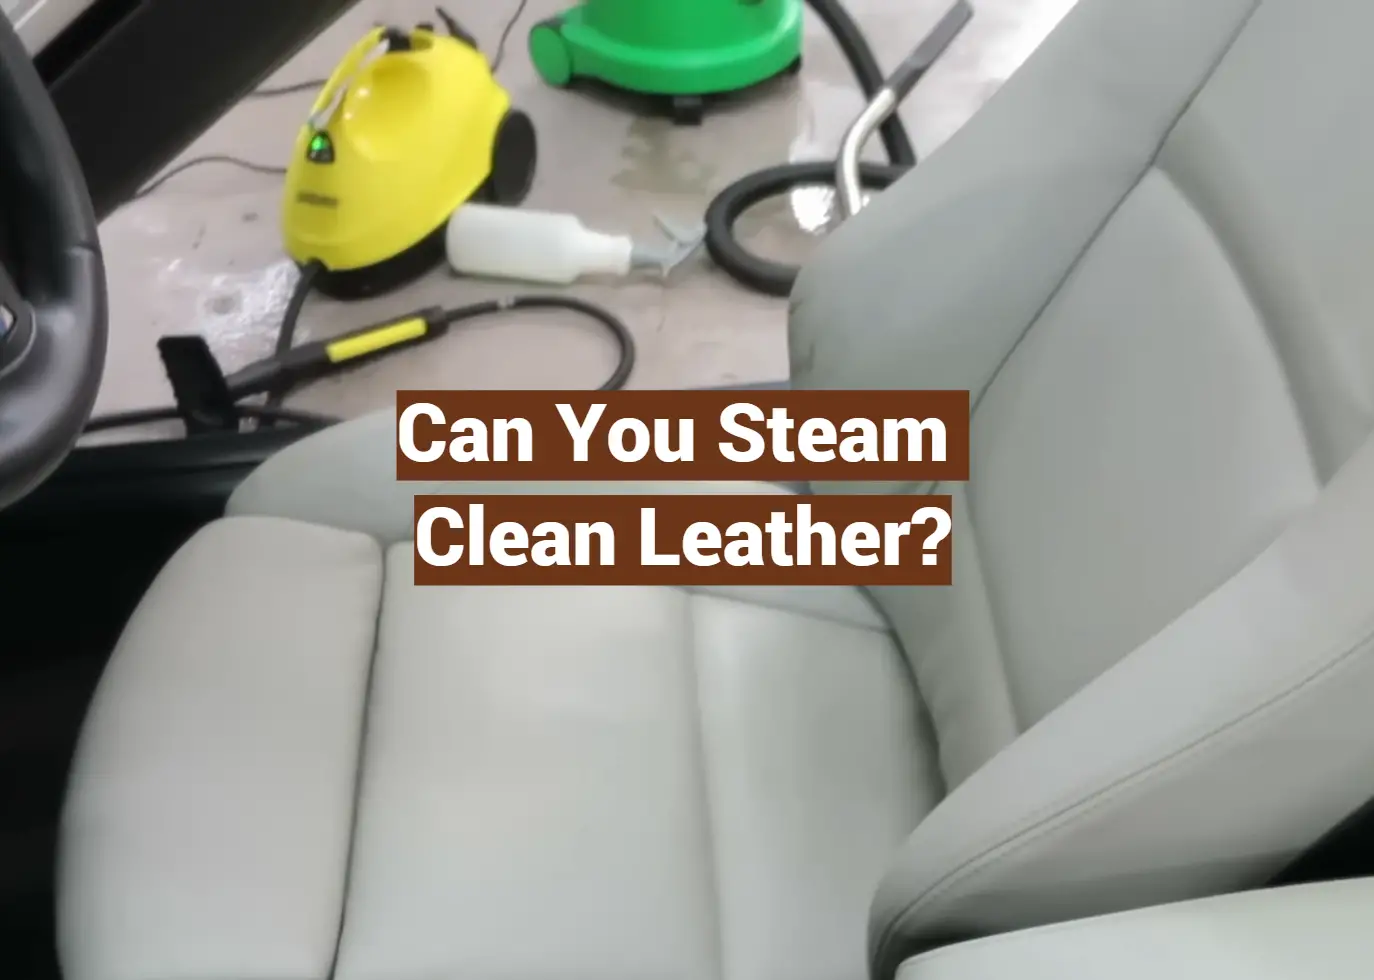 Can You Steam Clean Leather?